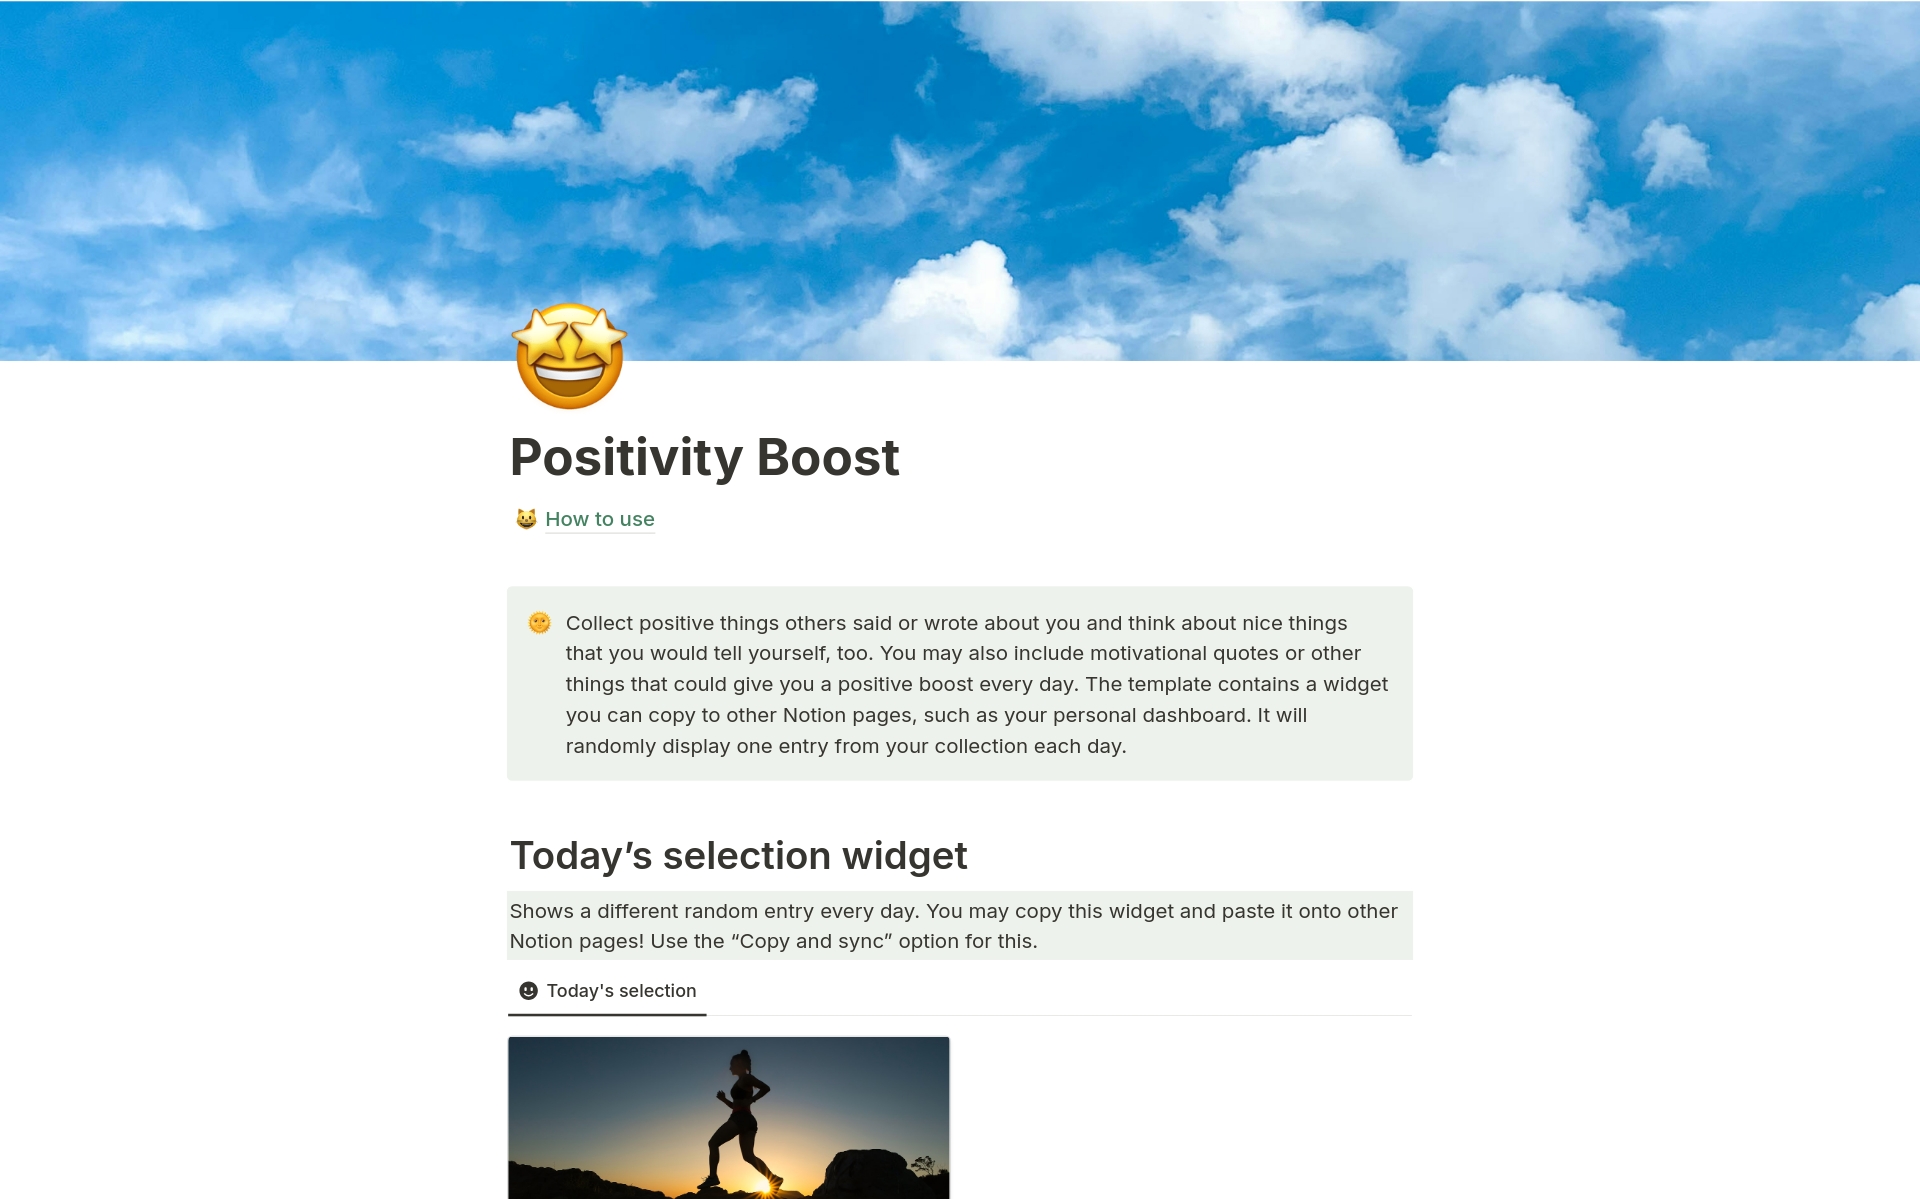 Get a positive boost every day! Collect positive things others said or wrote about you and think about nice things that you would tell yourself, too. You may also include motivational quotes or other things. The template contains a widget you can copy to other Notion pages.